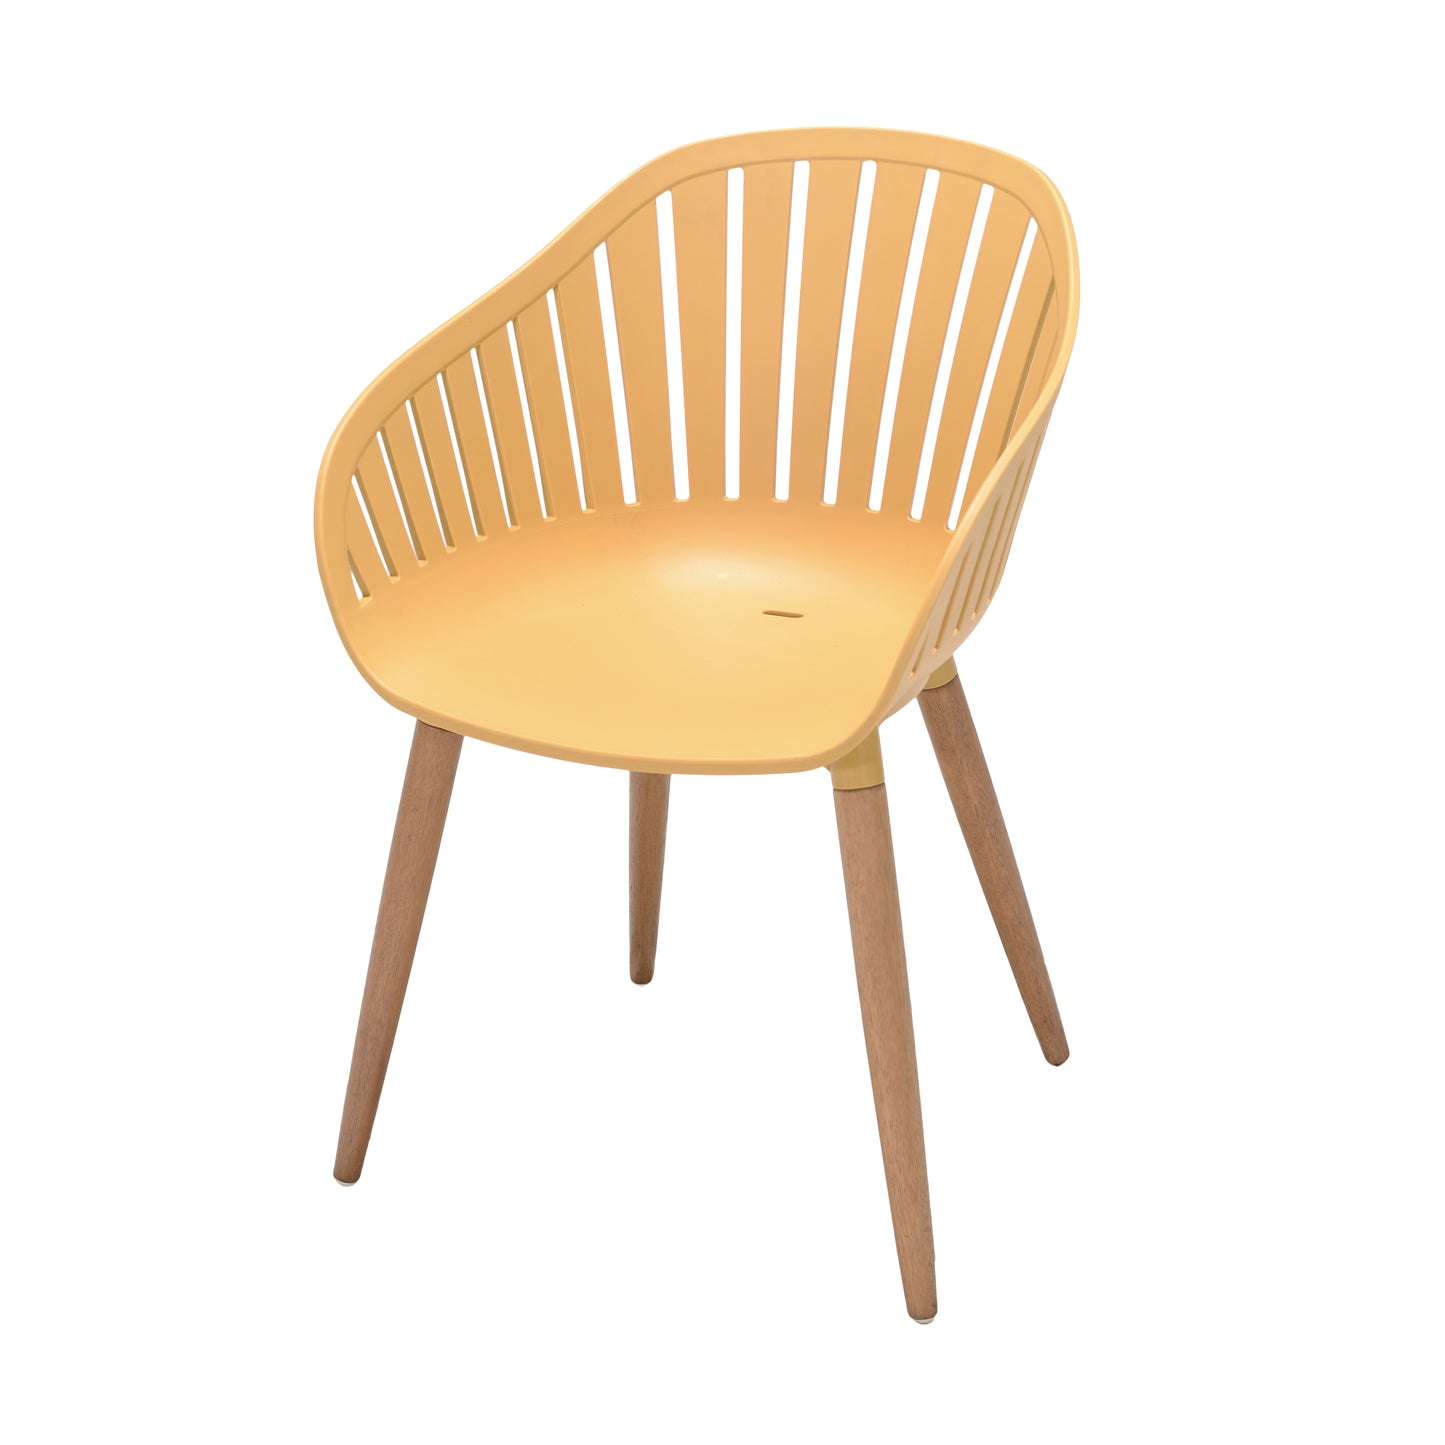 Set of 2 Recycled Carver Chairs - Honey